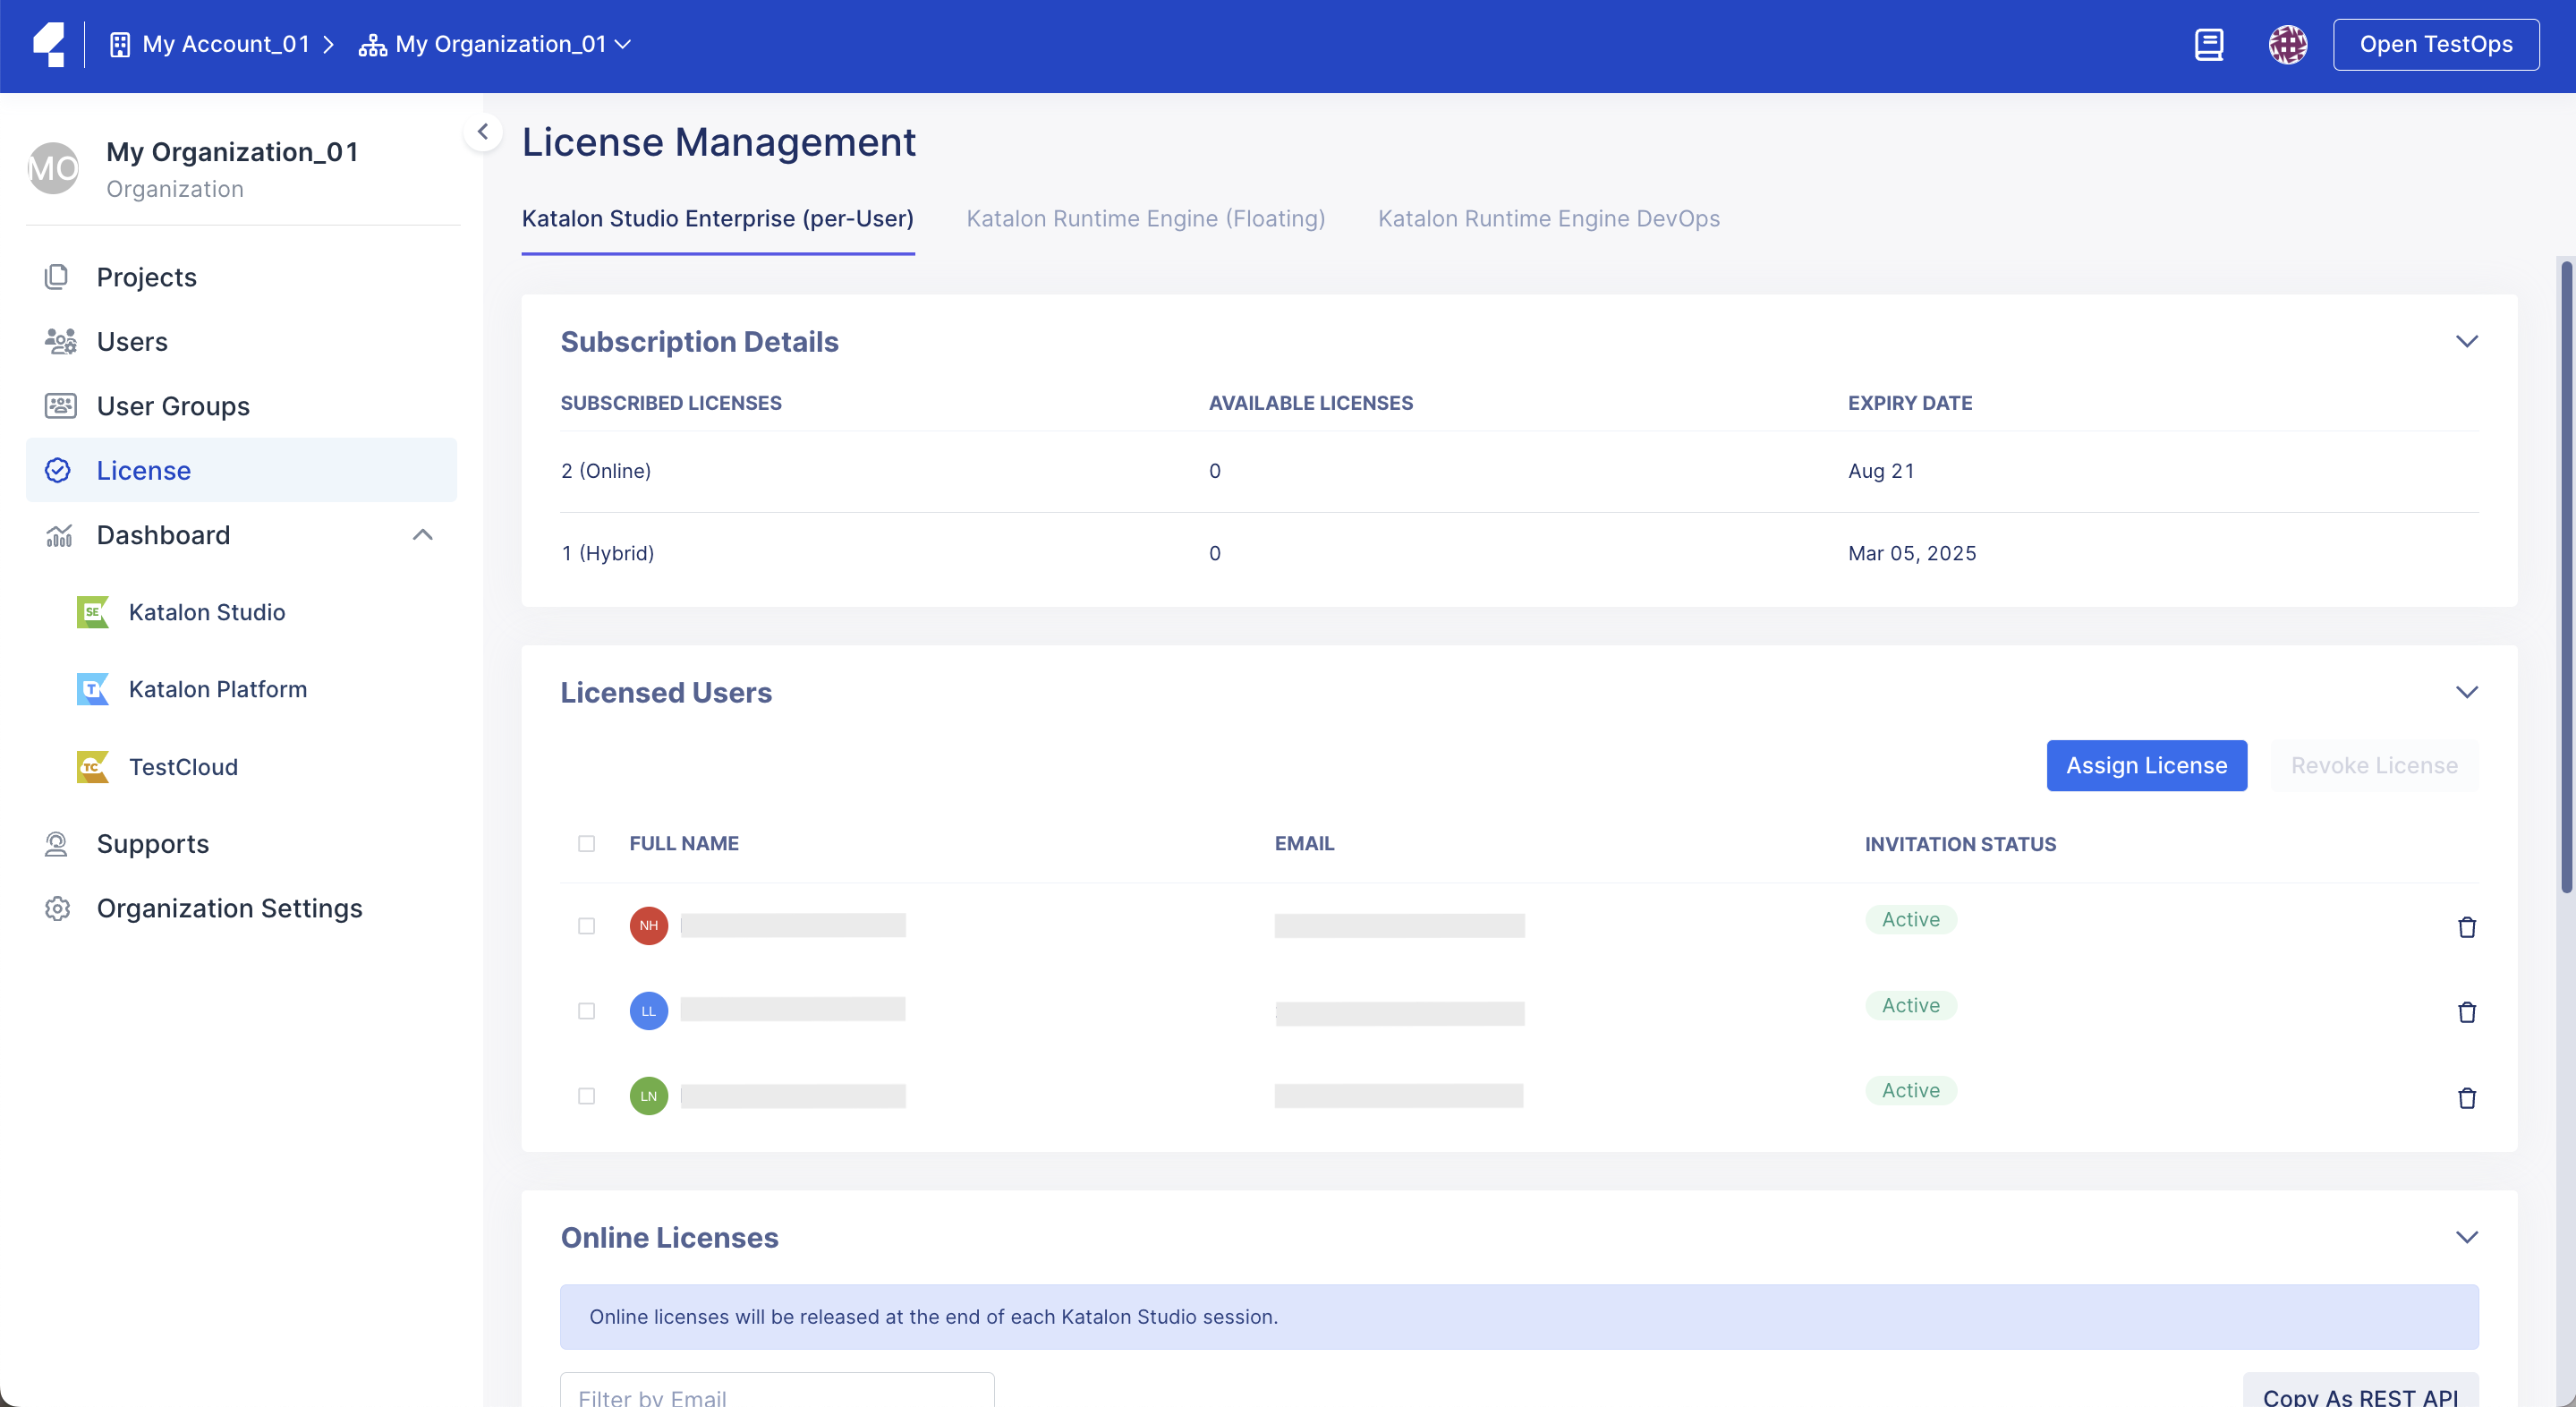 License management page